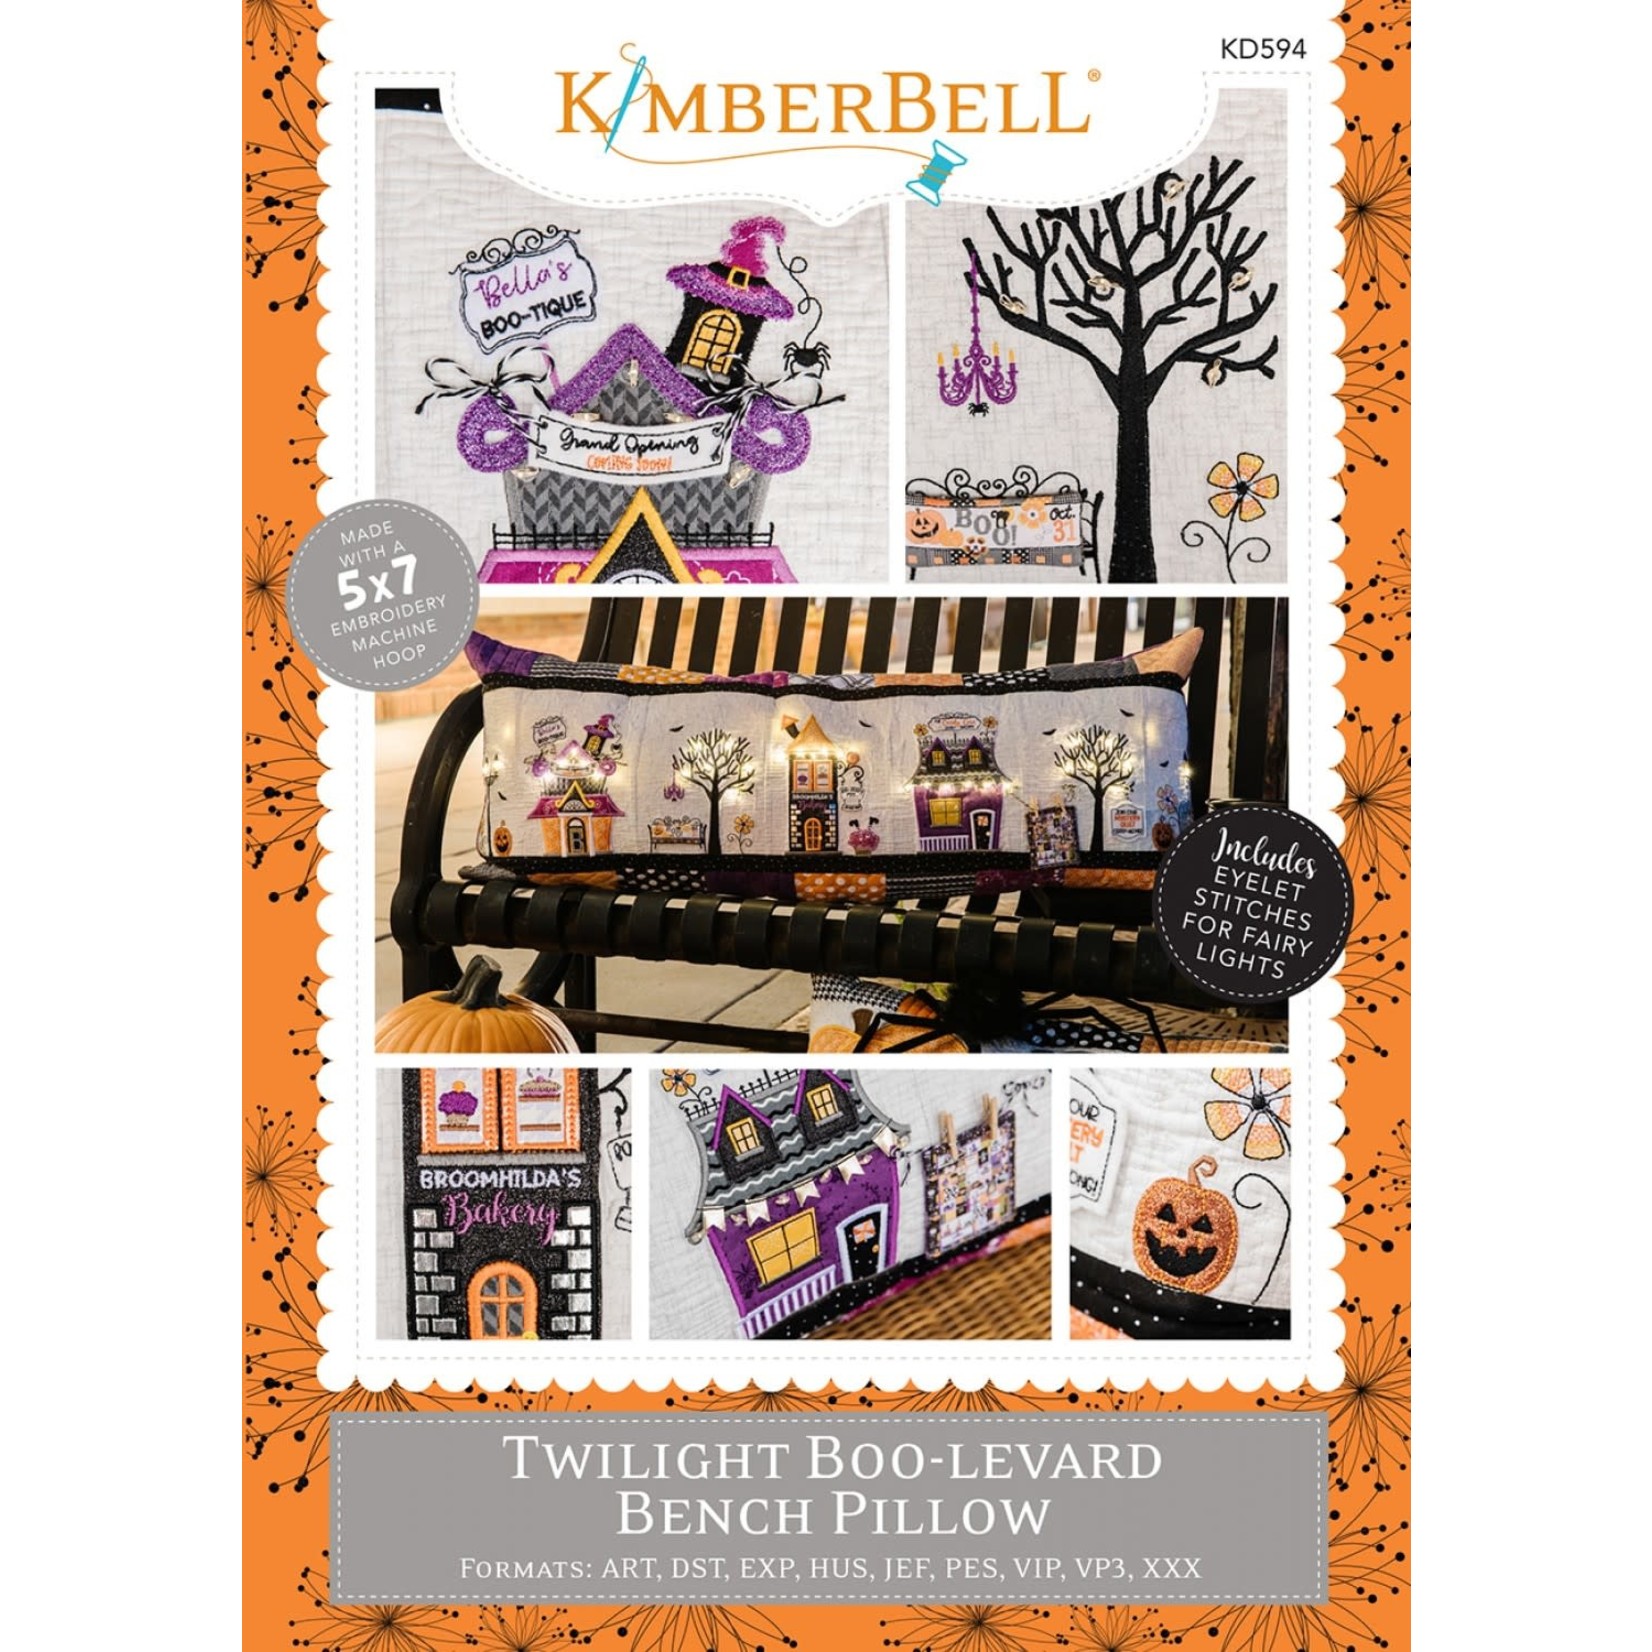 Kimberbell Designs Twilight Boo-levard Bench Pillow Machine Embroidery Version